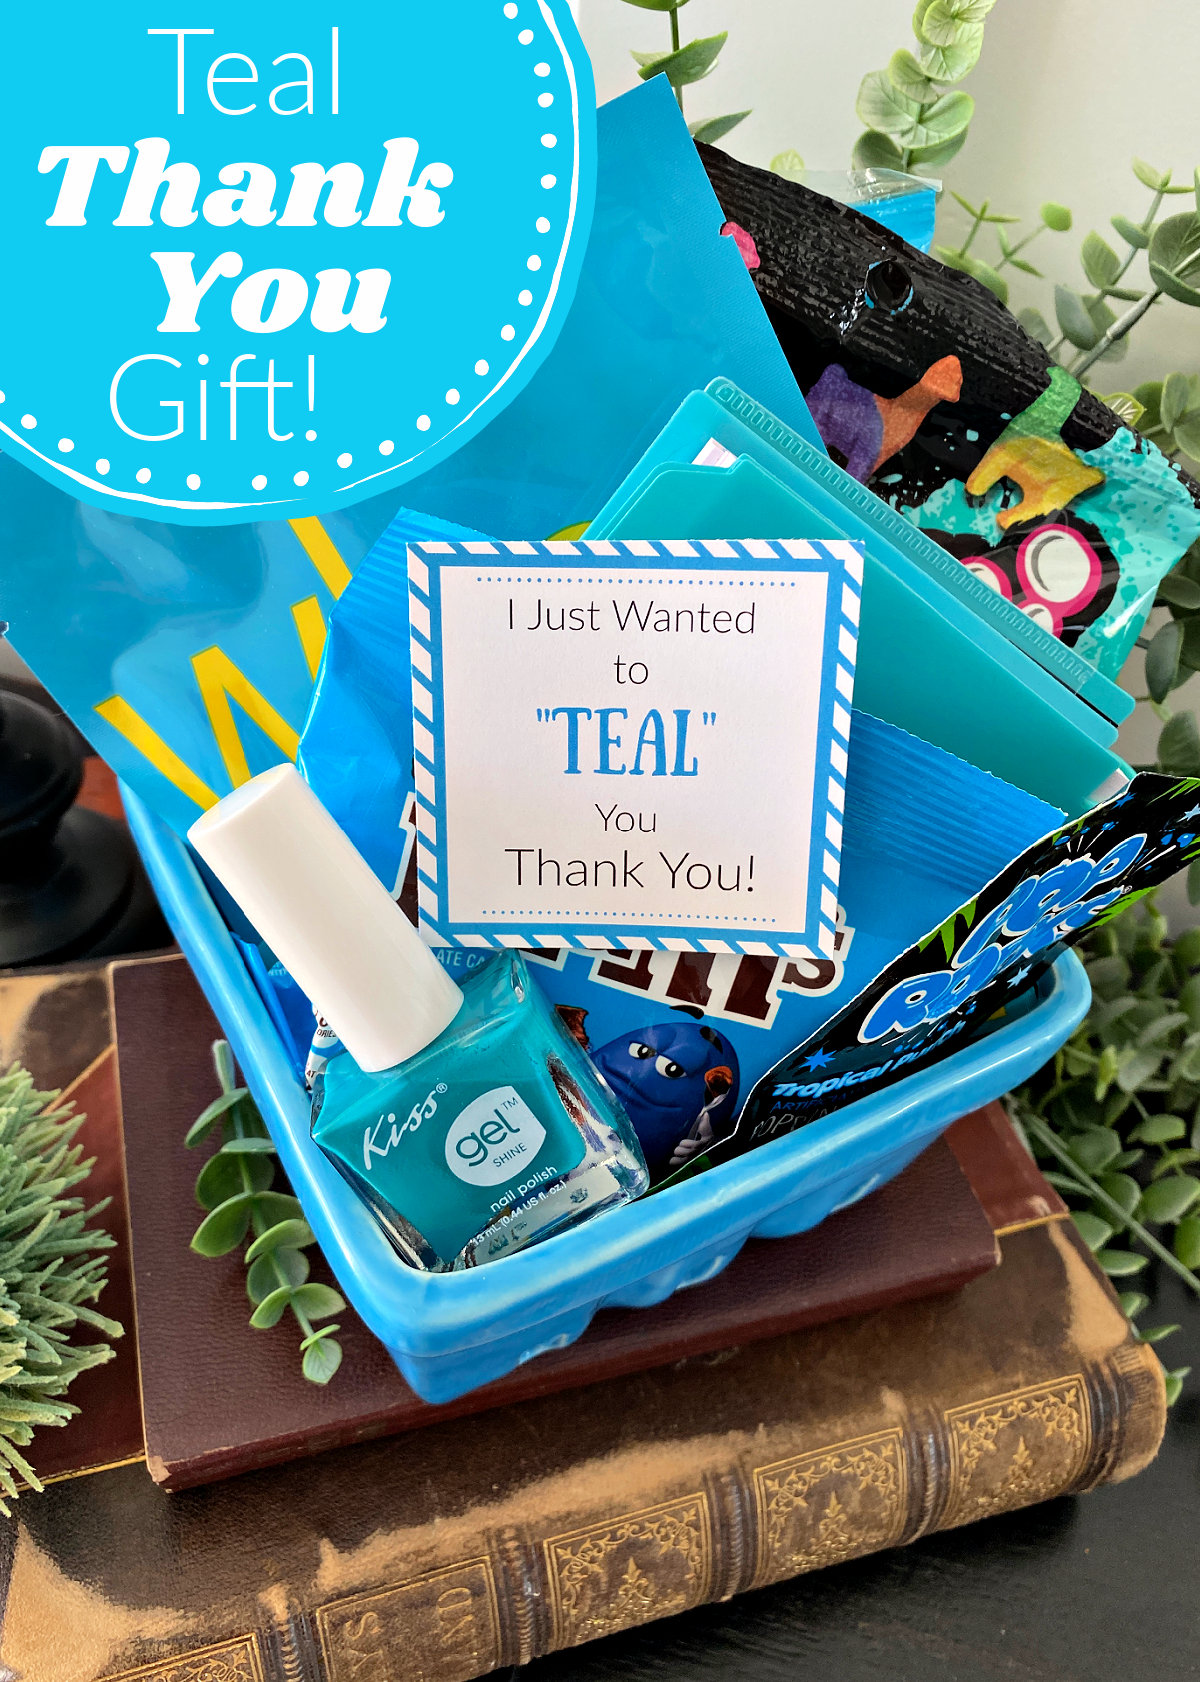 Teal- Thank You Gift: